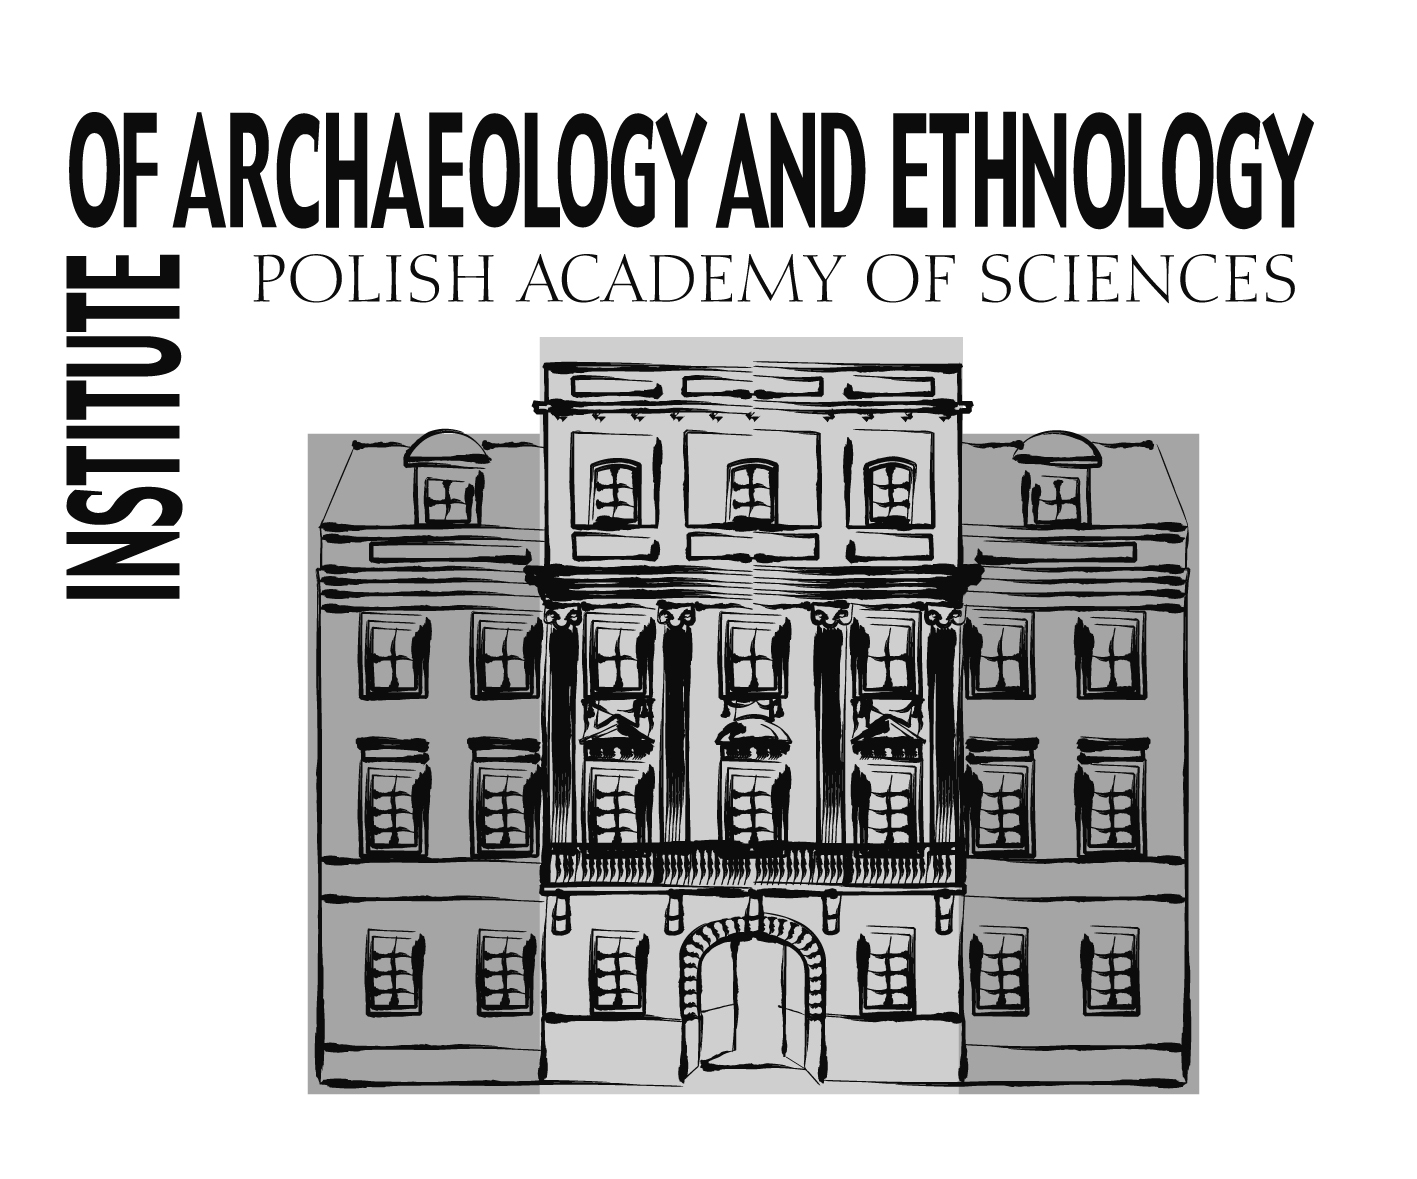 Institute of Archaeology and Ethnology of the Polish Academy of Sciences